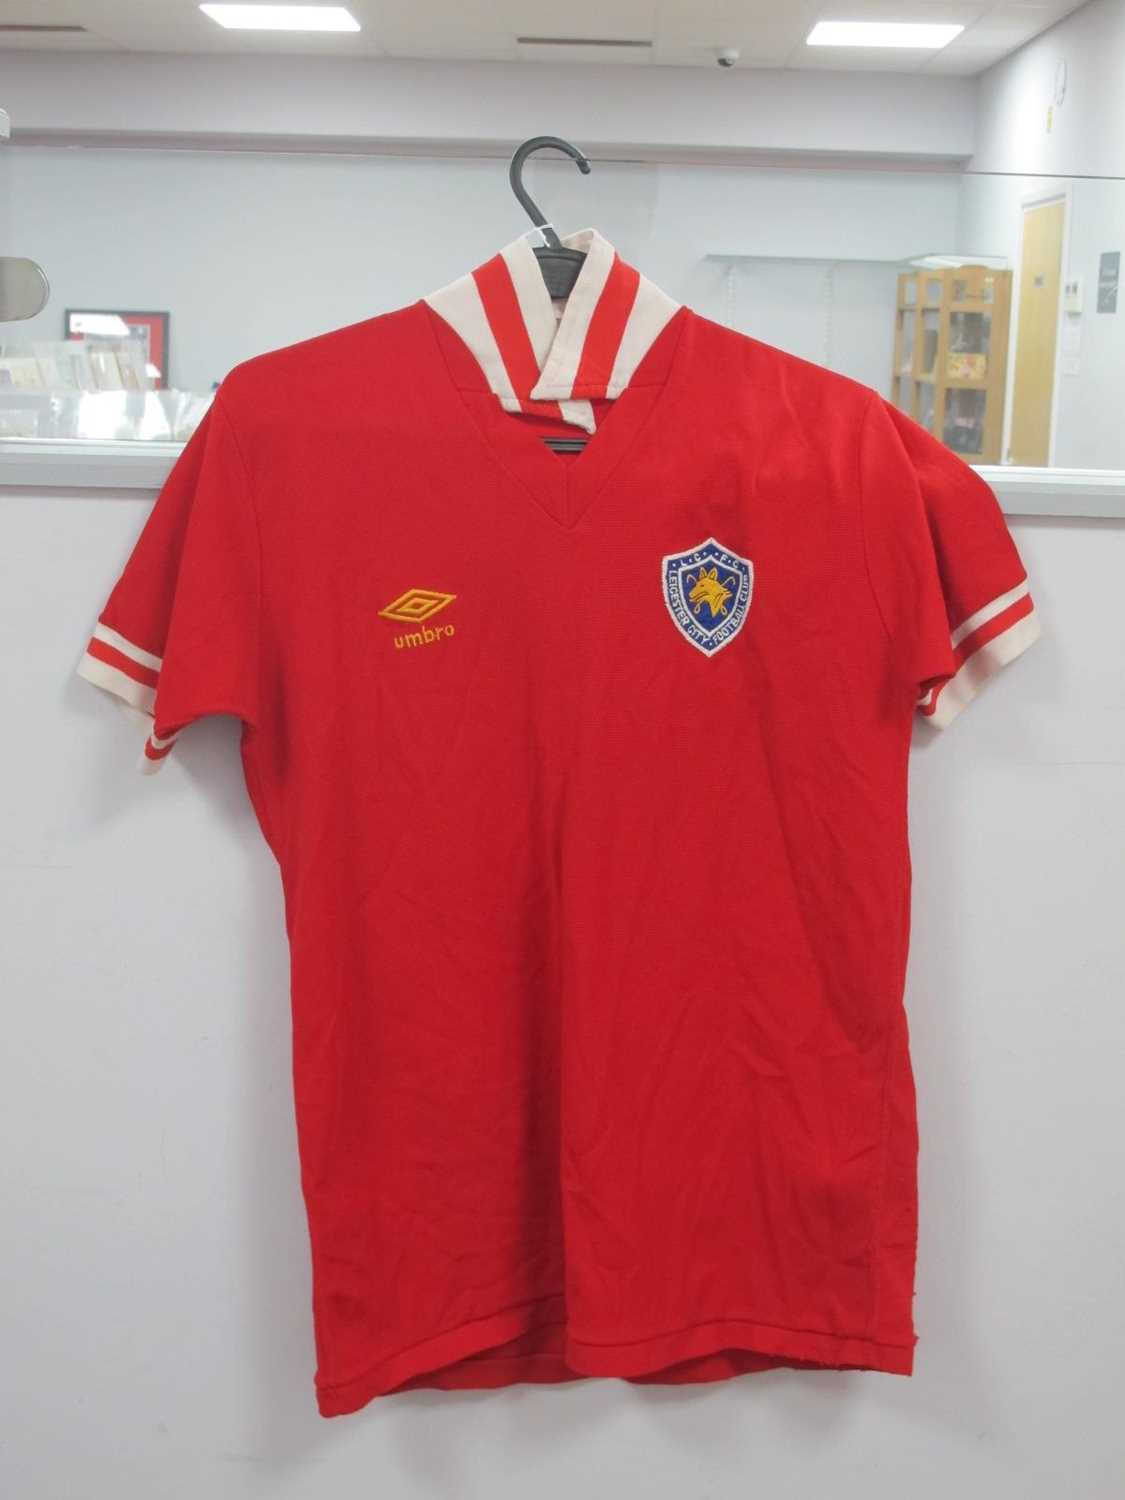 Leicester City Umbro Red Away Shirt, with striped collar and fox in shield badge, Number 3 to - Image 2 of 6